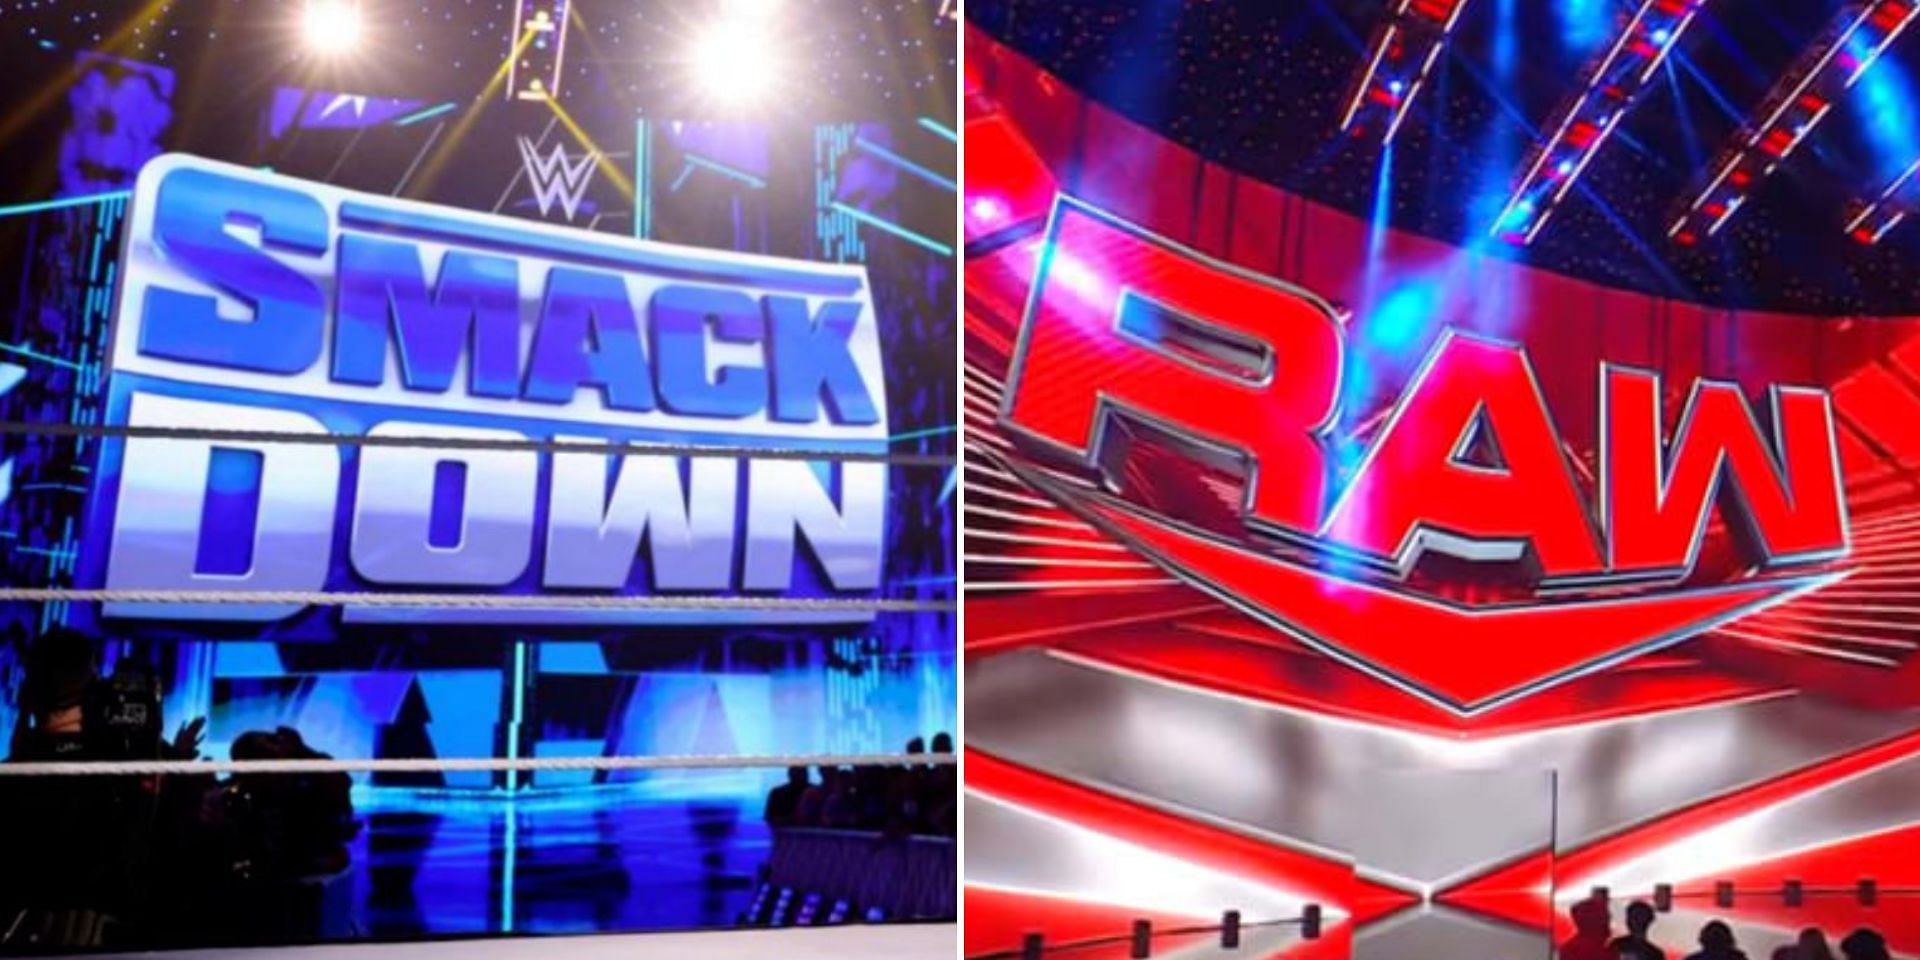 WWE has announced TV deals for RAW and SmackDown